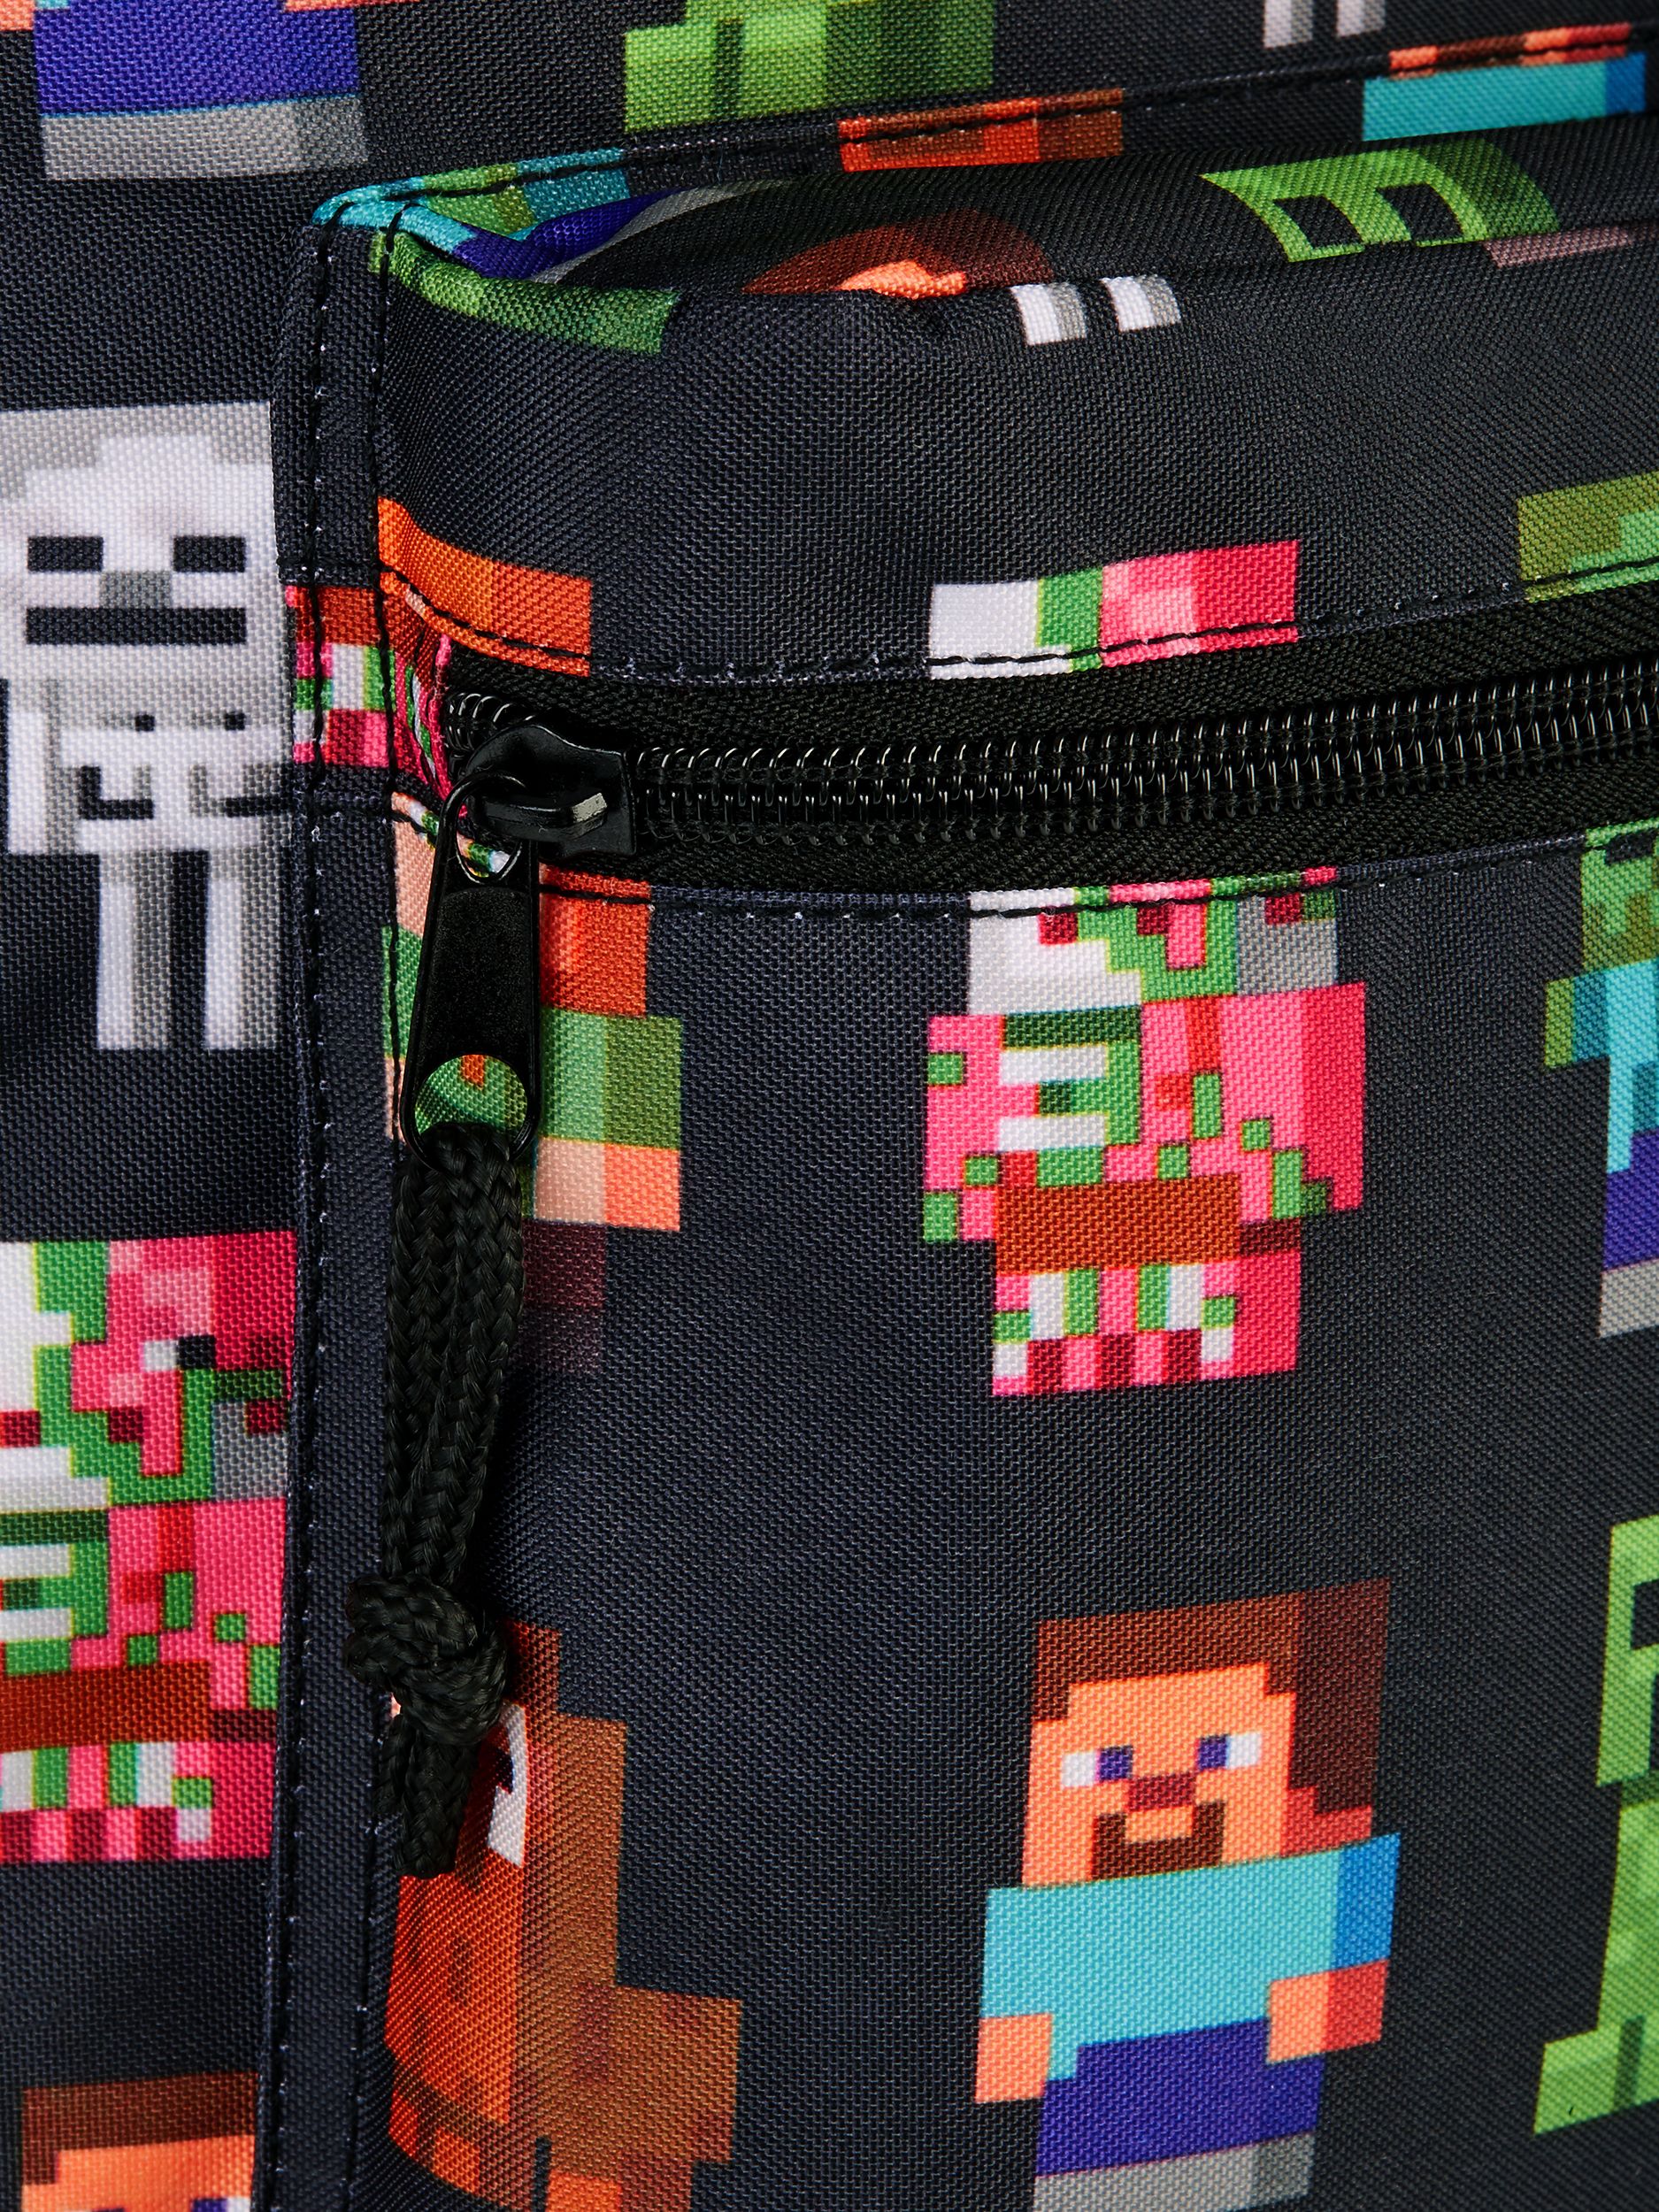 Minecraft Characters 16" Backpack - image 4 of 4